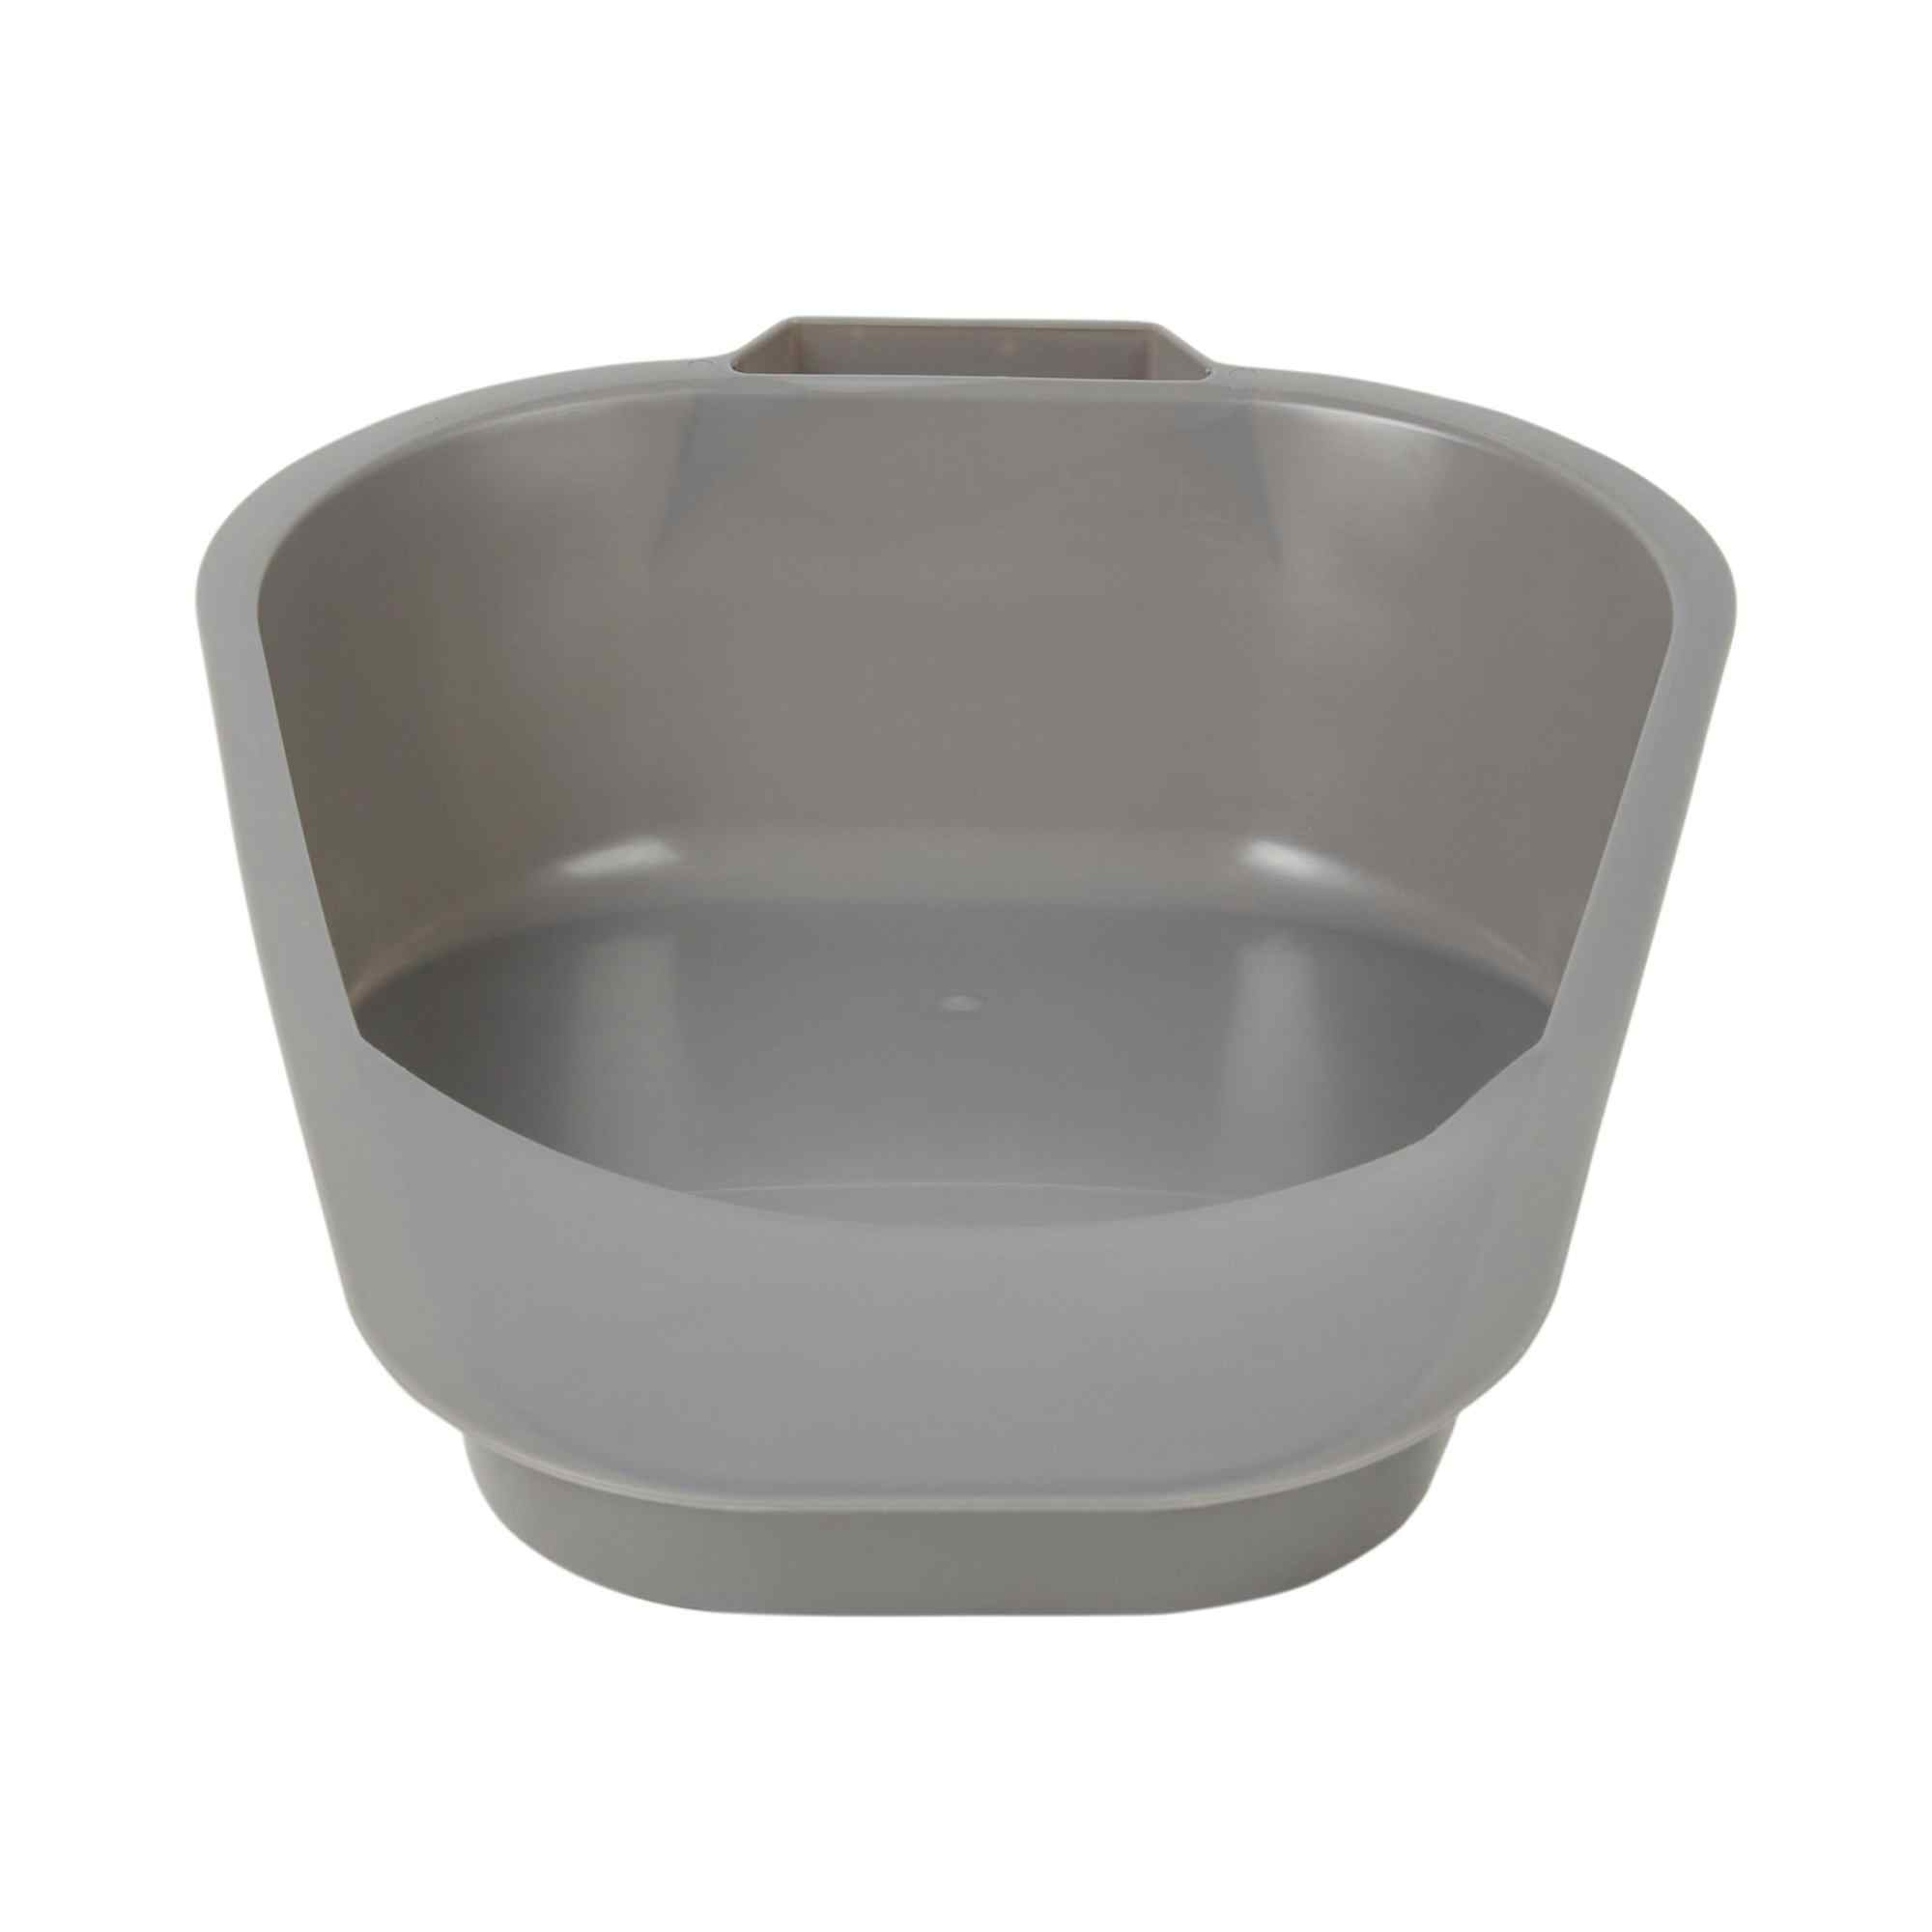 Image of McKesson Fracture Bedpan product front